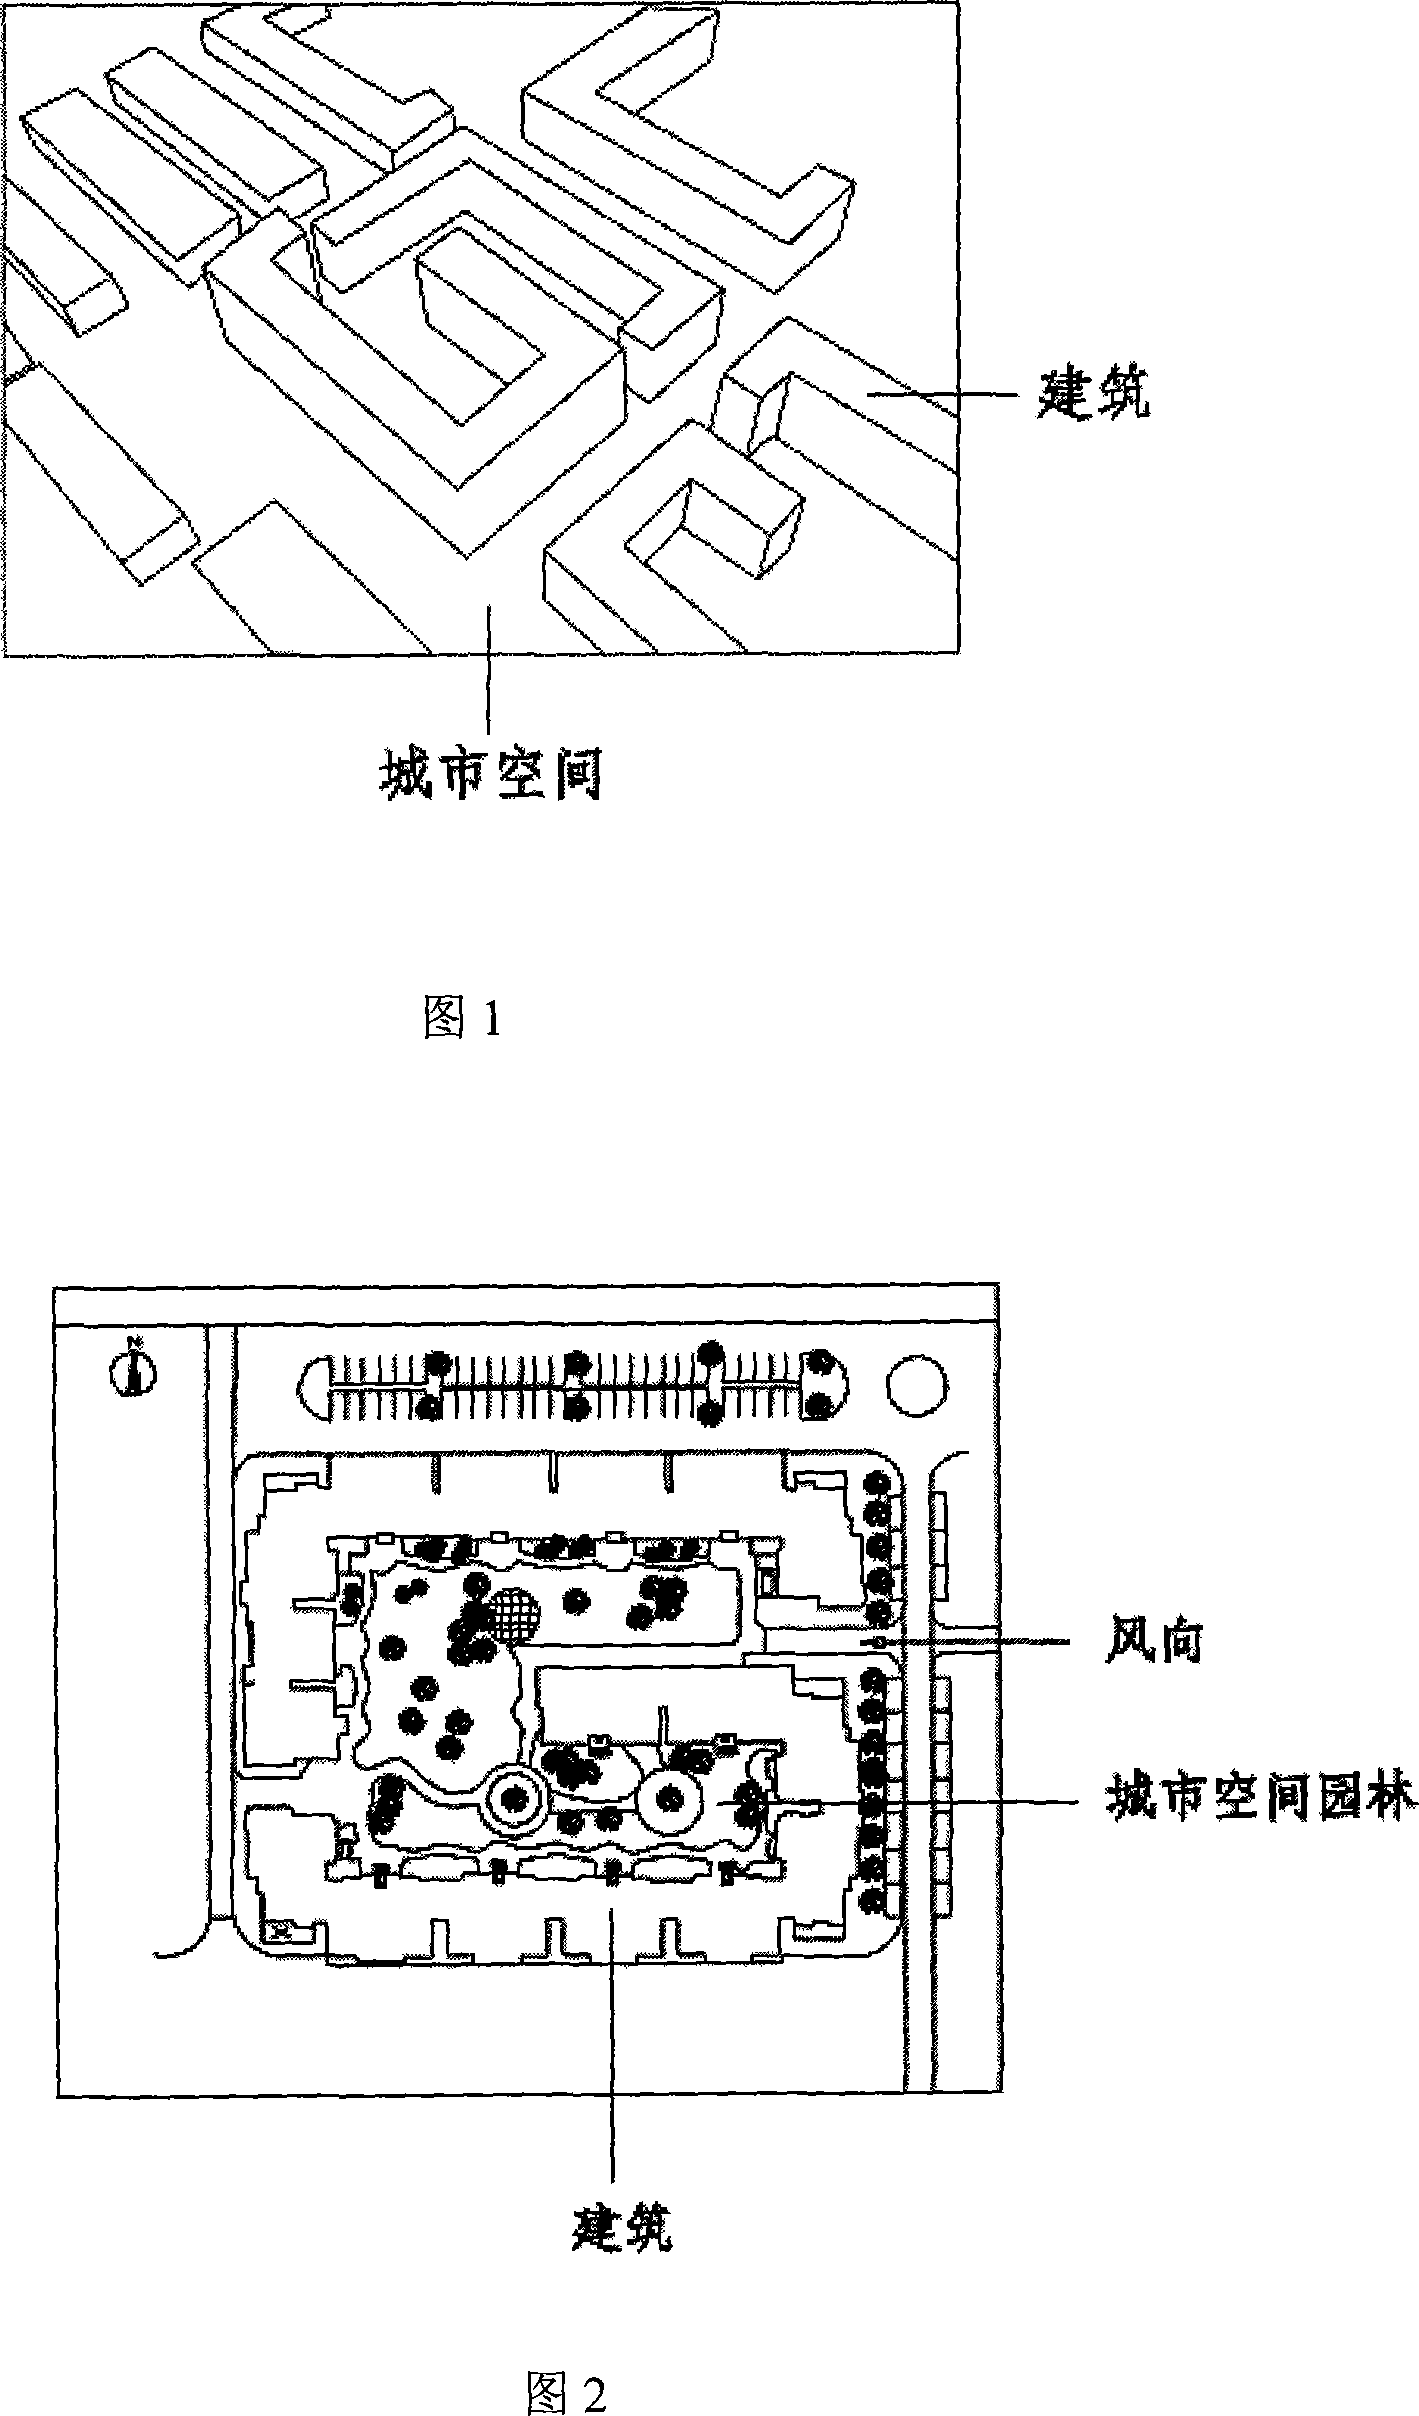 Particle picture velocity measuring method for accurately measuring construction and city space